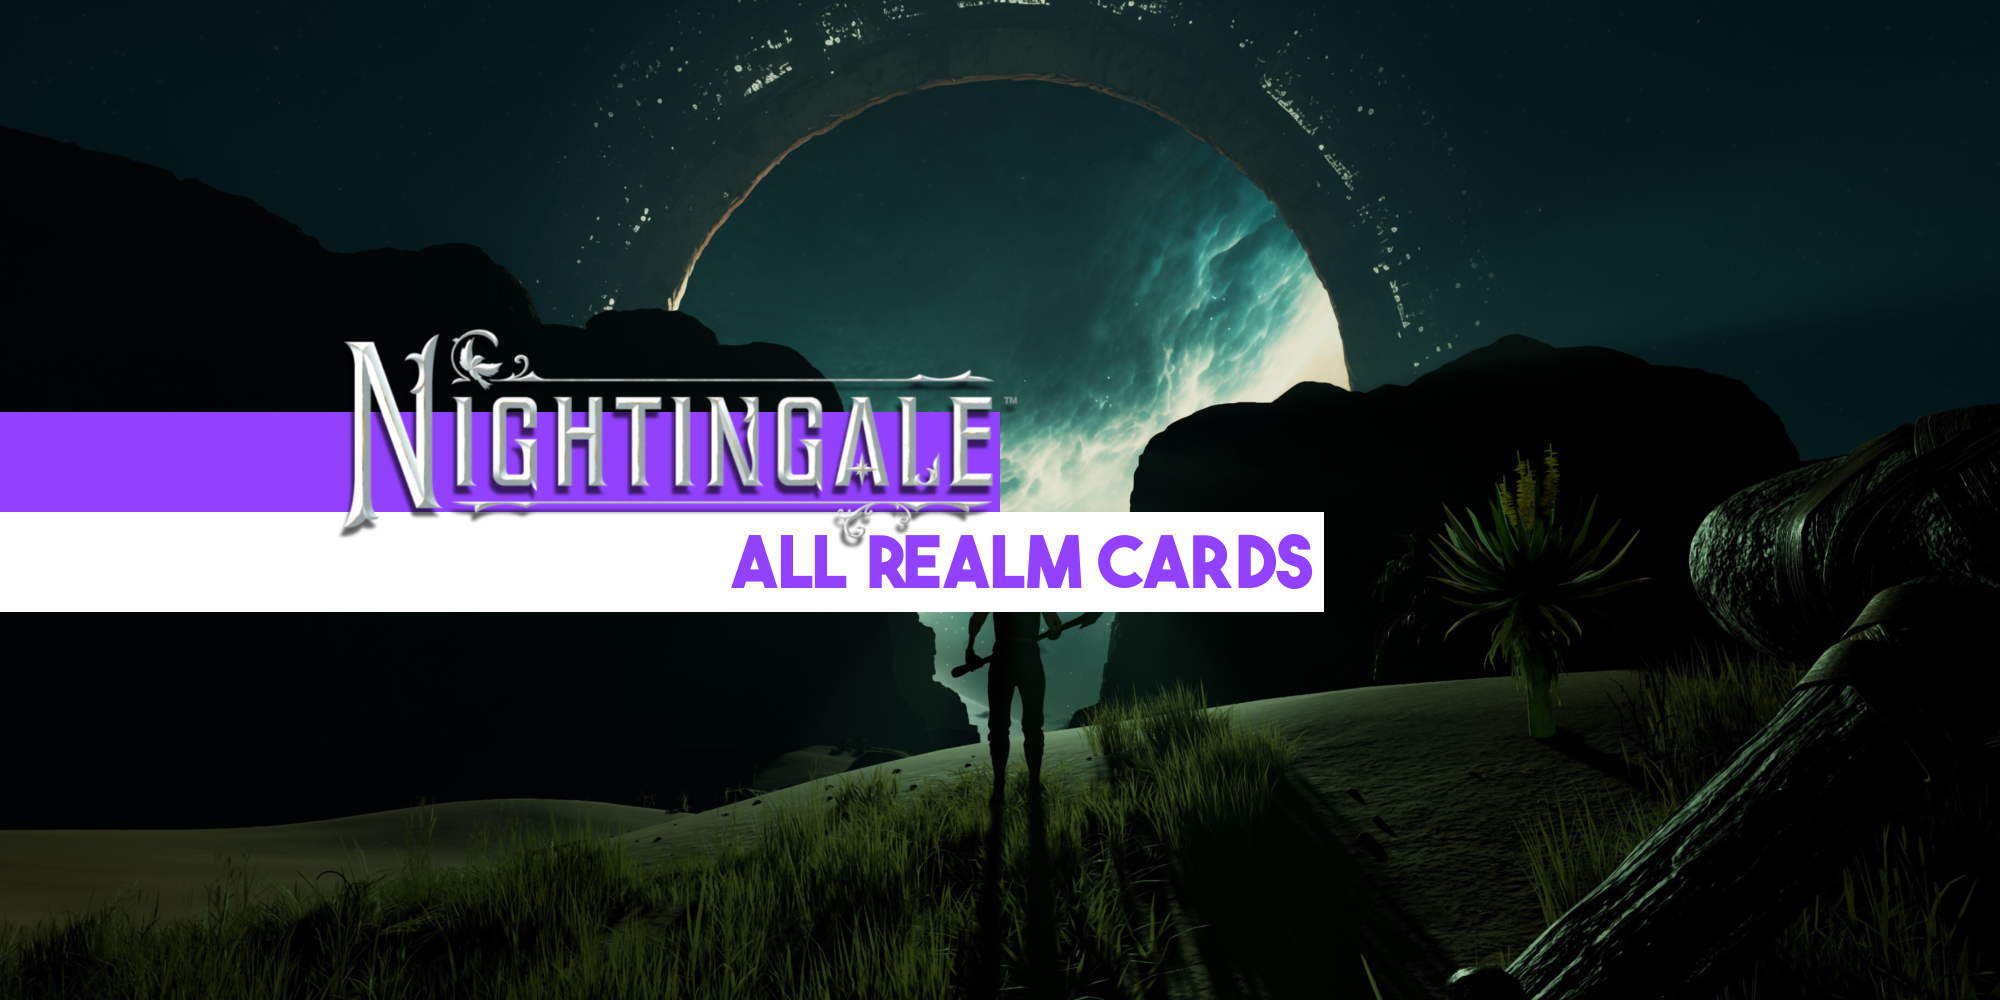 nightingale_all_realm_cards-2